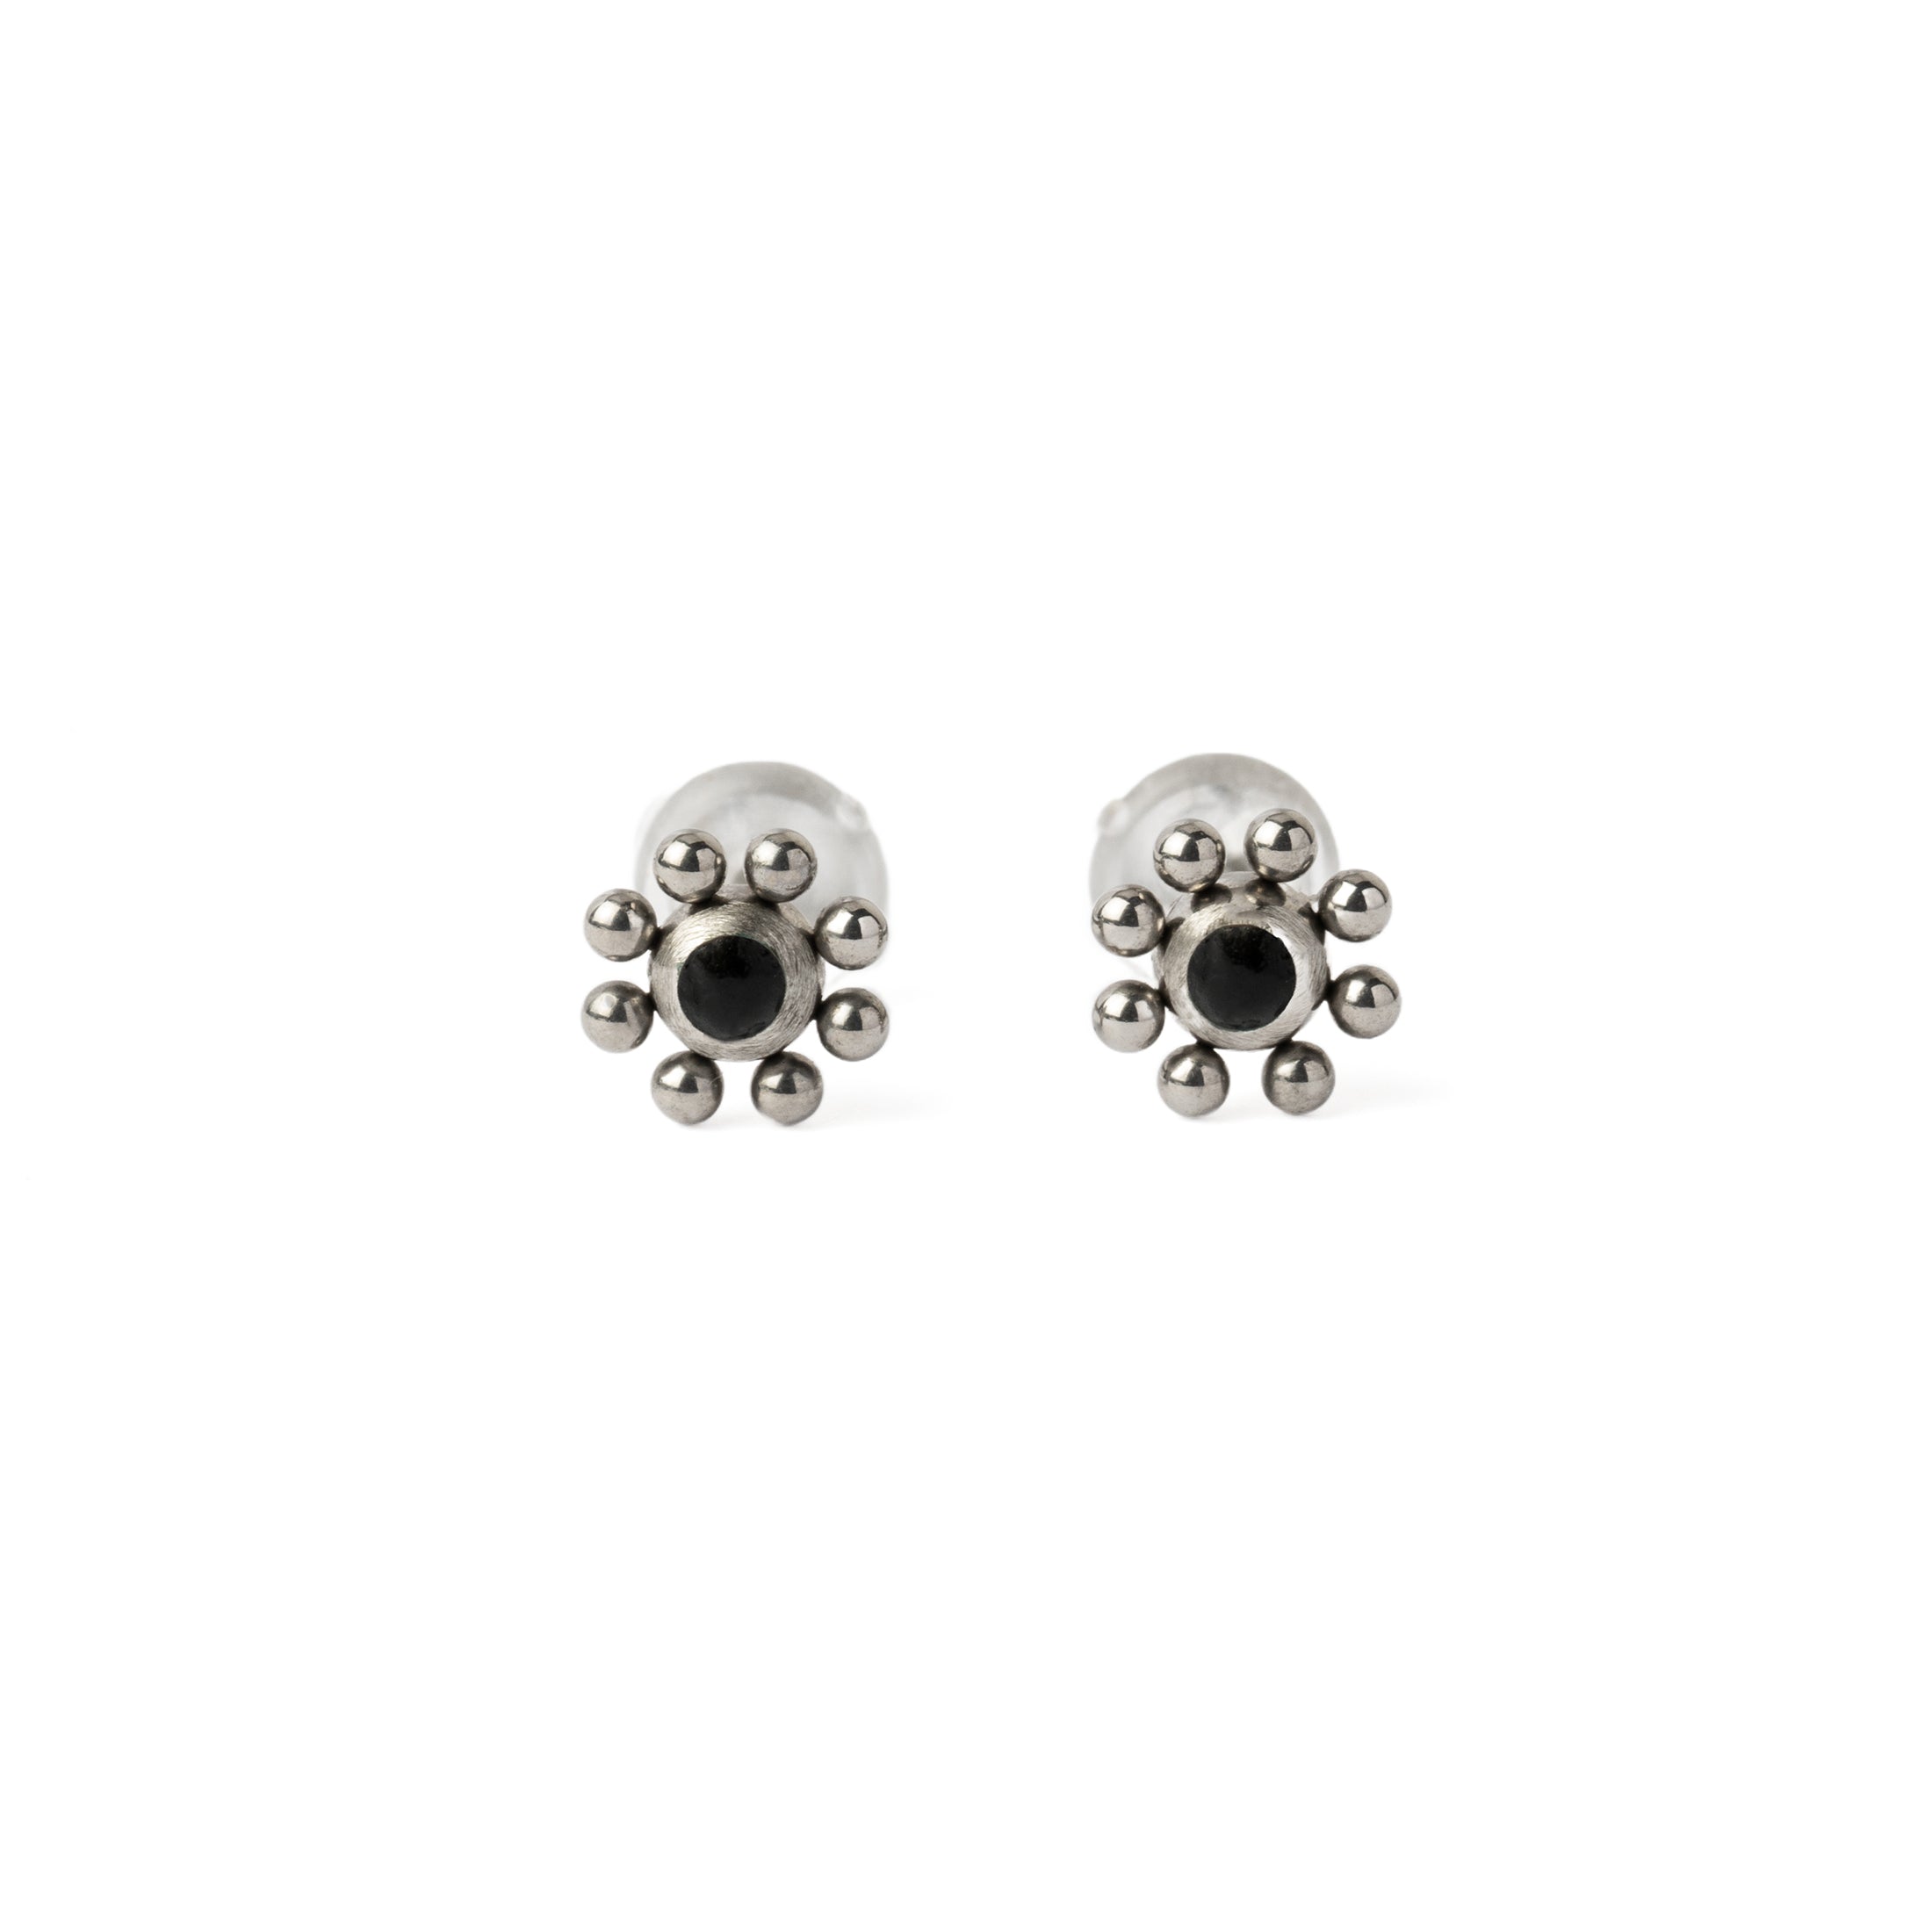 Daisy Black Shell Ear Studs frontal view